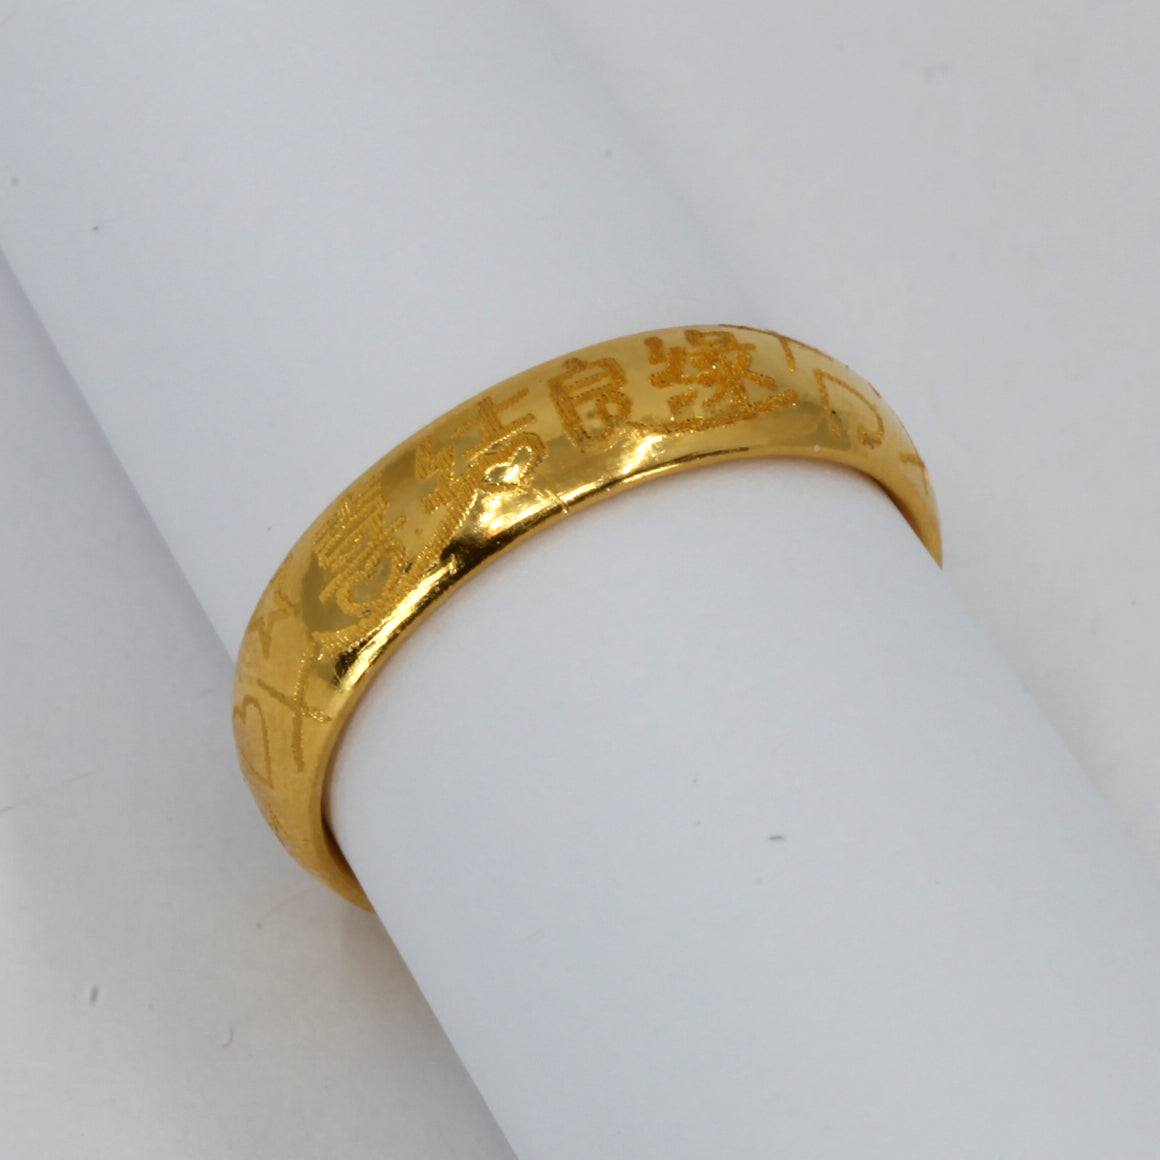 HK Ring Size 29 [916 Gold Ring] Weight 9.18 grams Sao Hallmark, Men's  Fashion, Watches & Accessories, Jewelry on Carousell